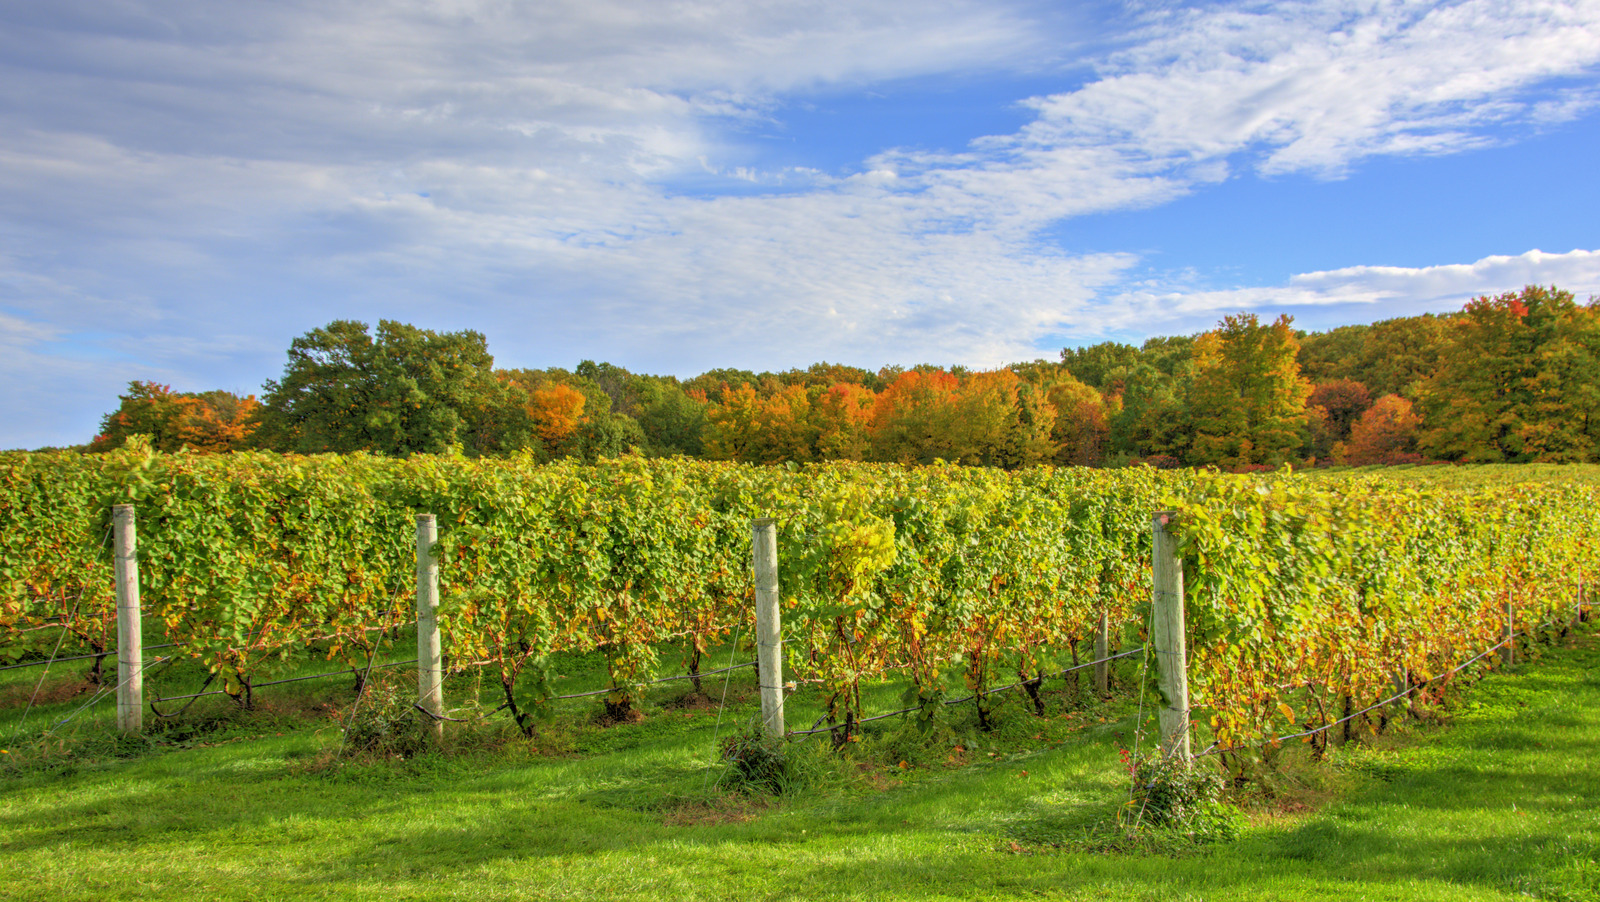 This Midwest Town Is One Of The Best Wine Destinations In The U.S. – Explore